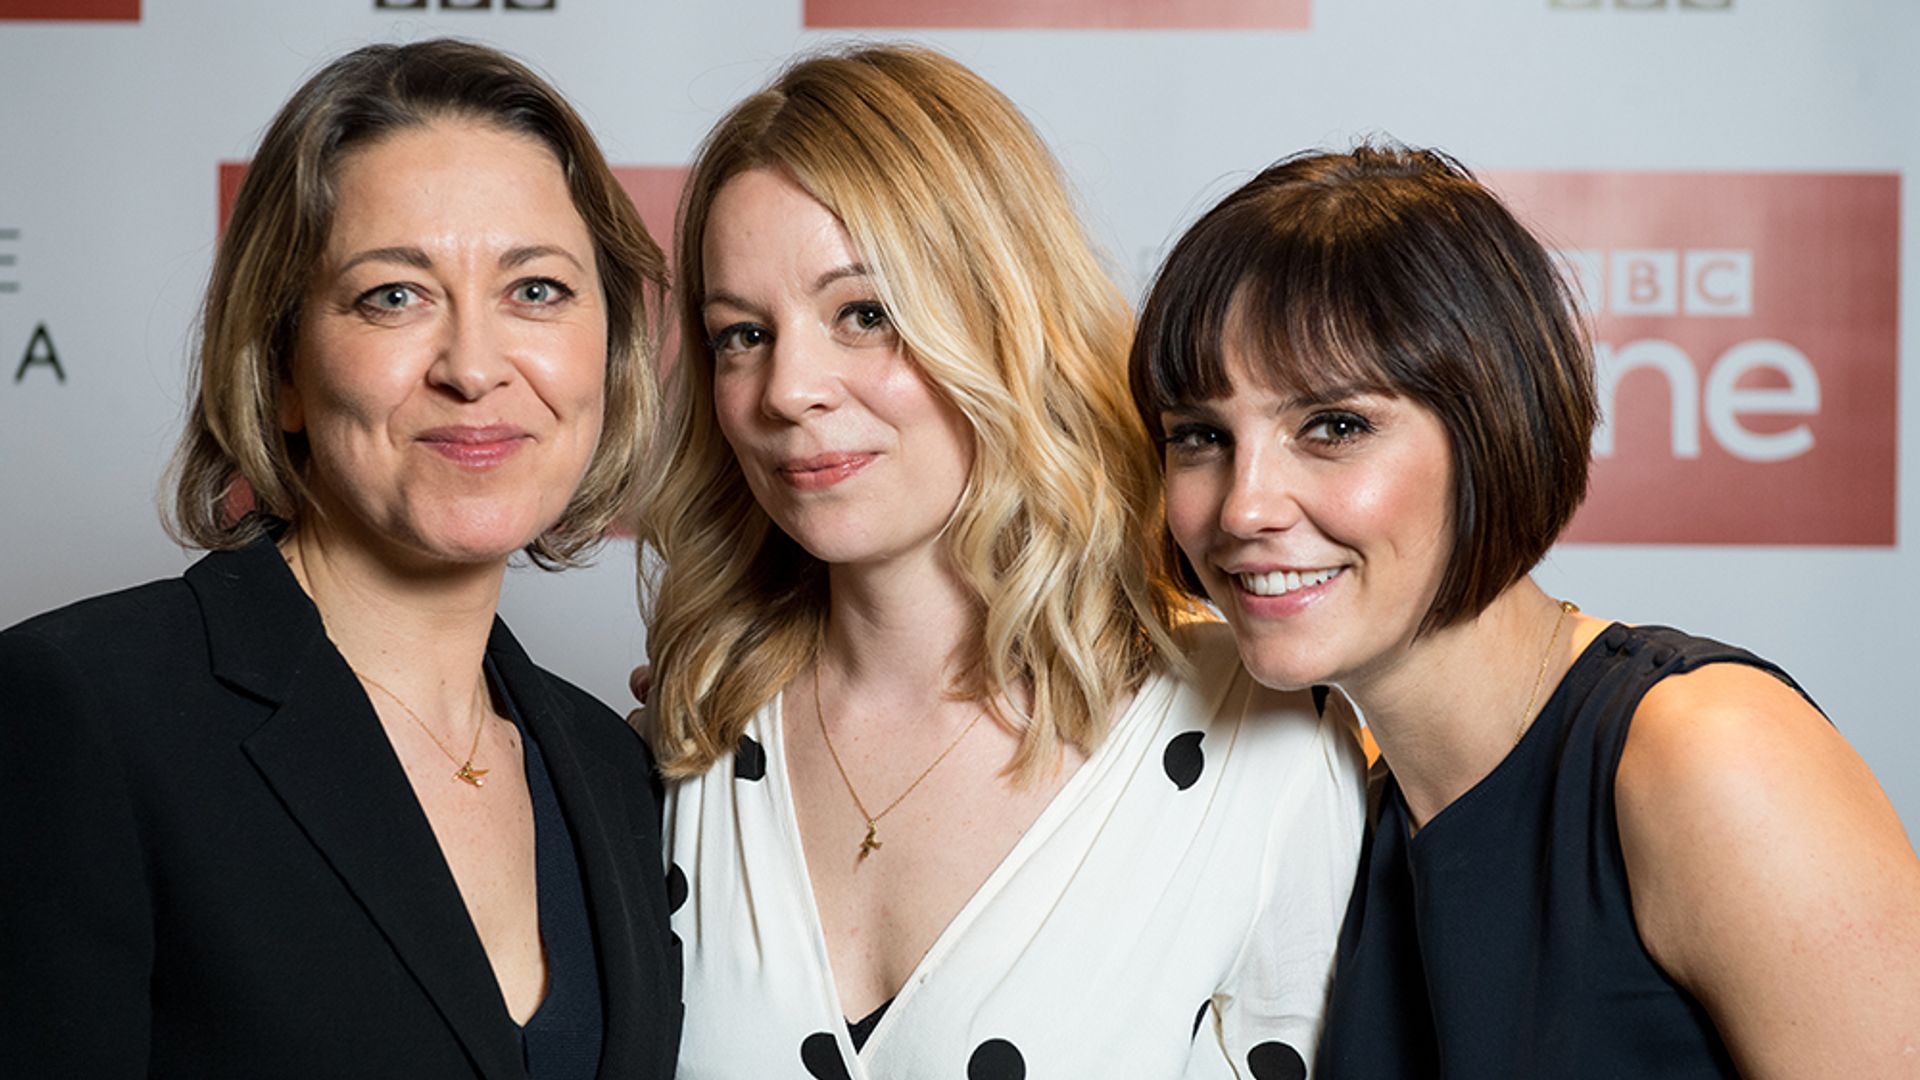 Nicola Walker, Fiona Button and Annabel Scholey at a BBC event